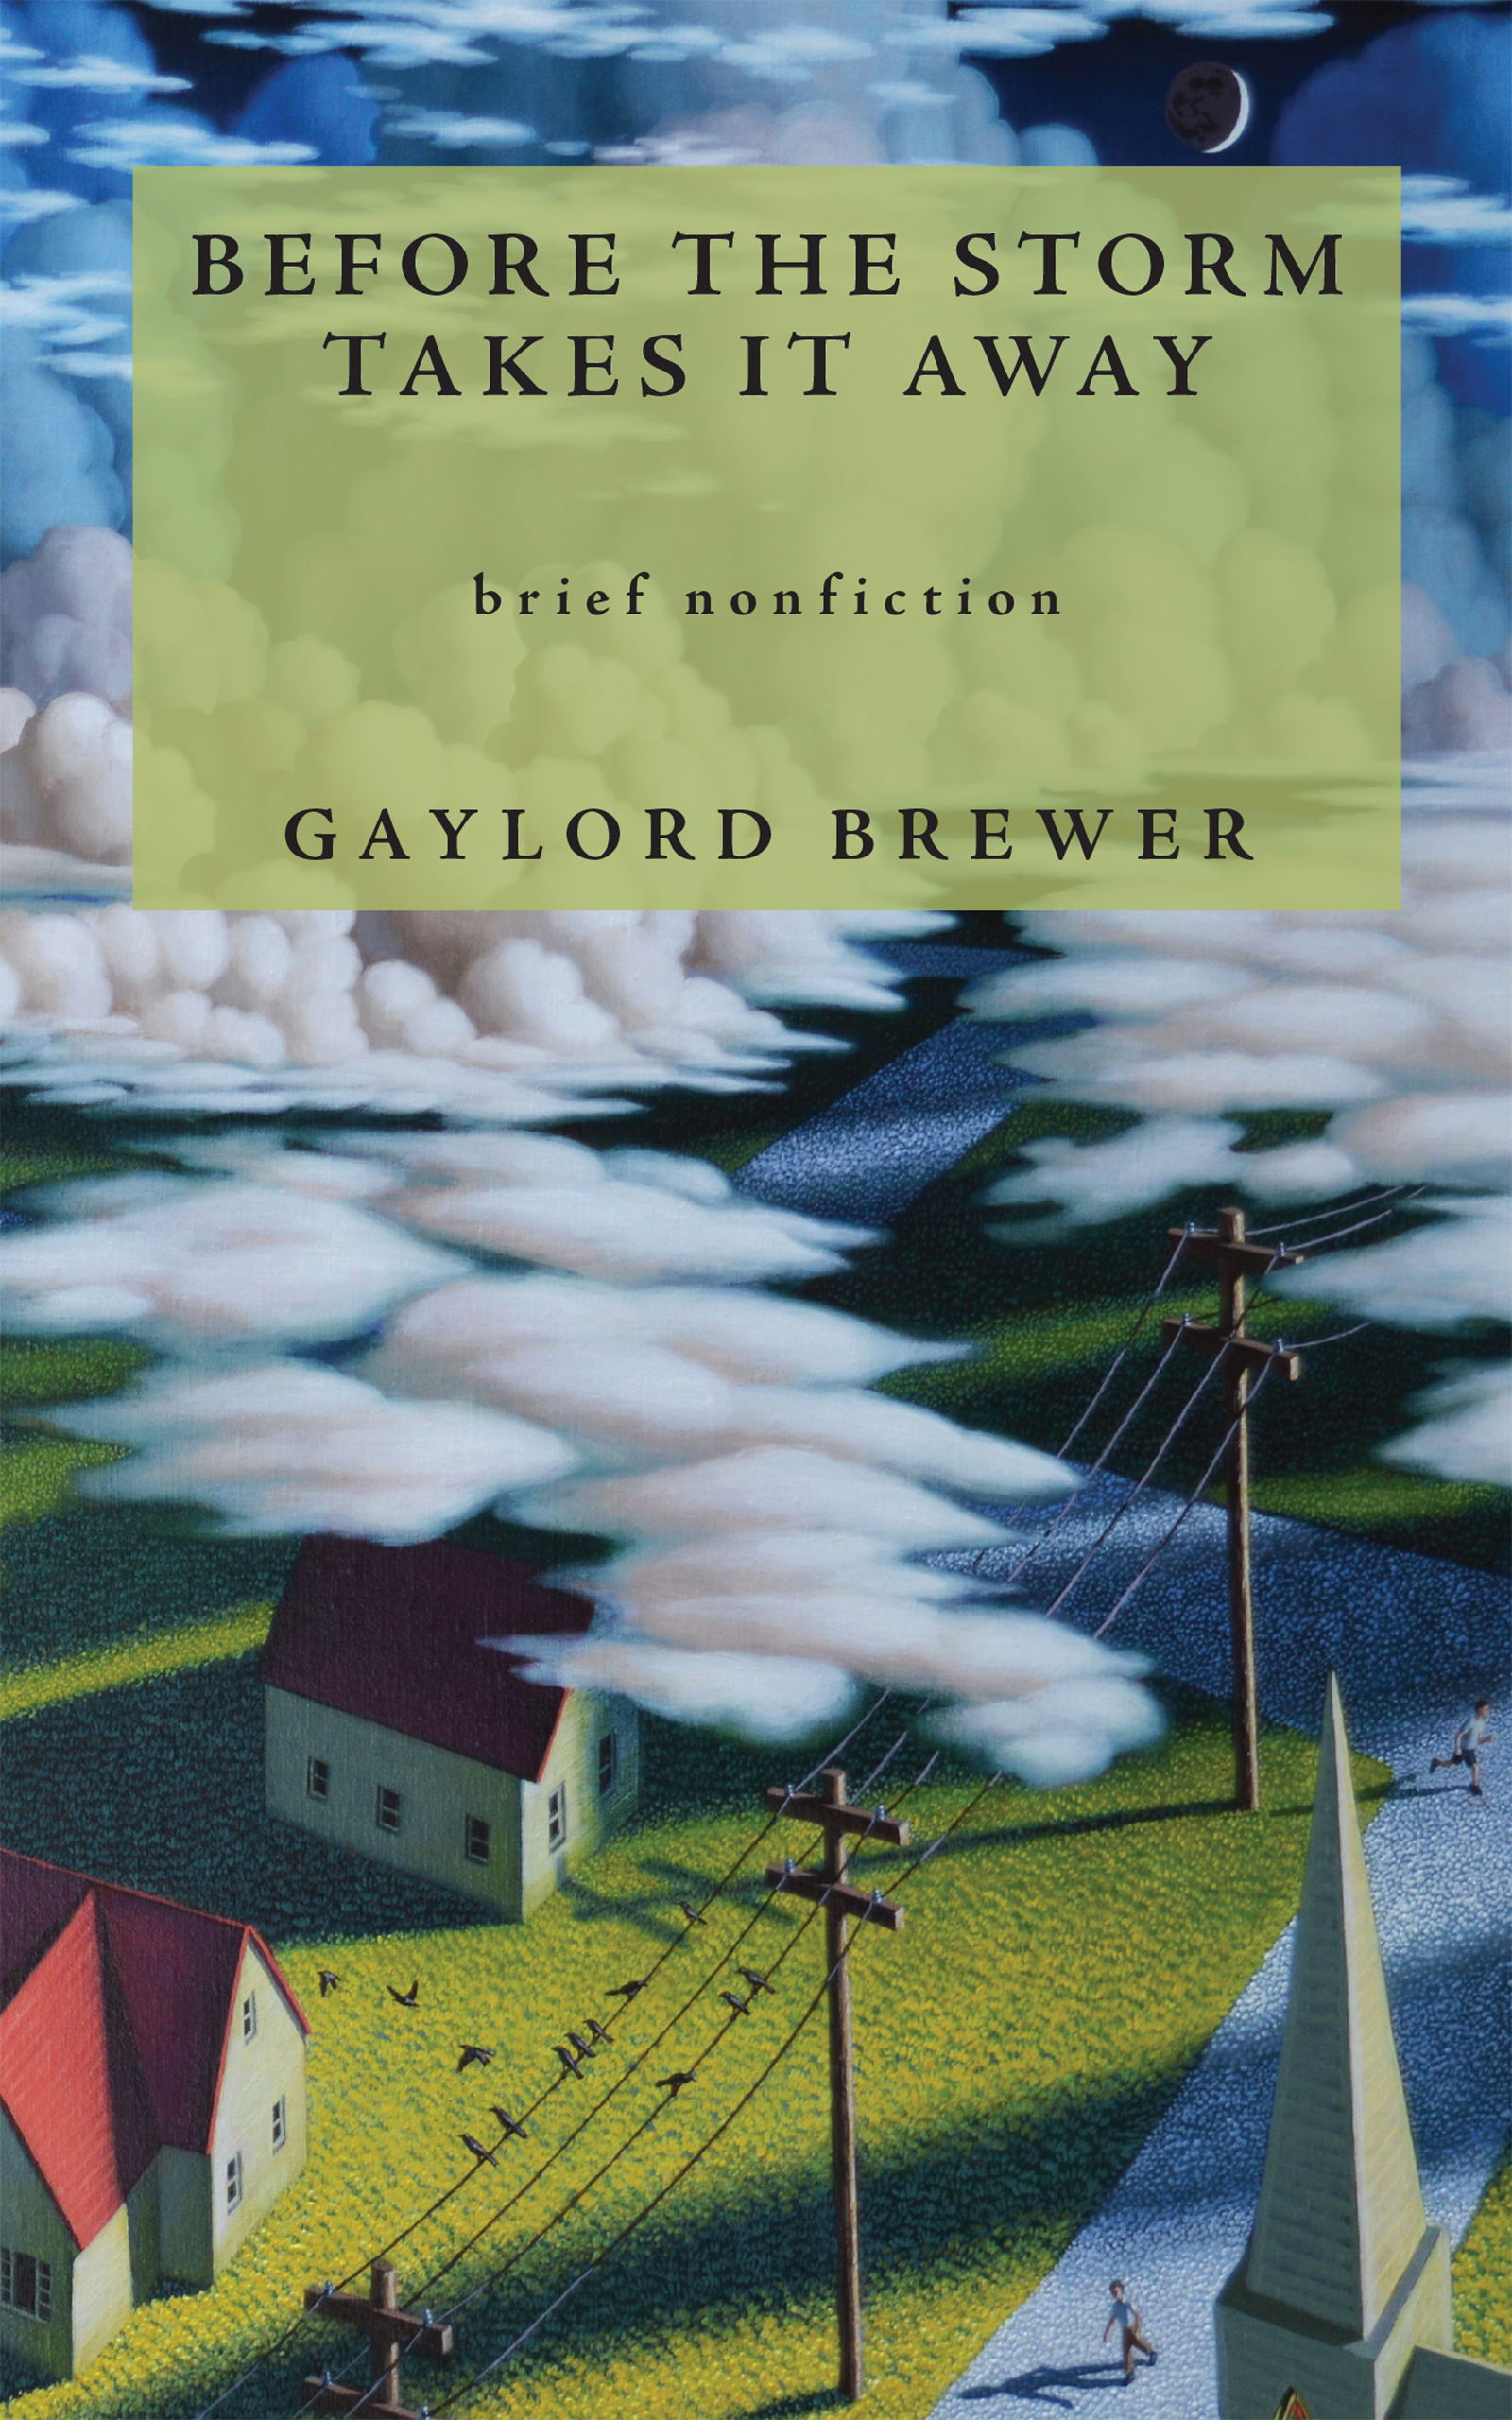 A painting of an overhead view of a street seen through the clouds, with a green box overlaid against the painting, containing the words "Before the Storm Takes It Away, brief nonfiction by Gaylord Brewer"